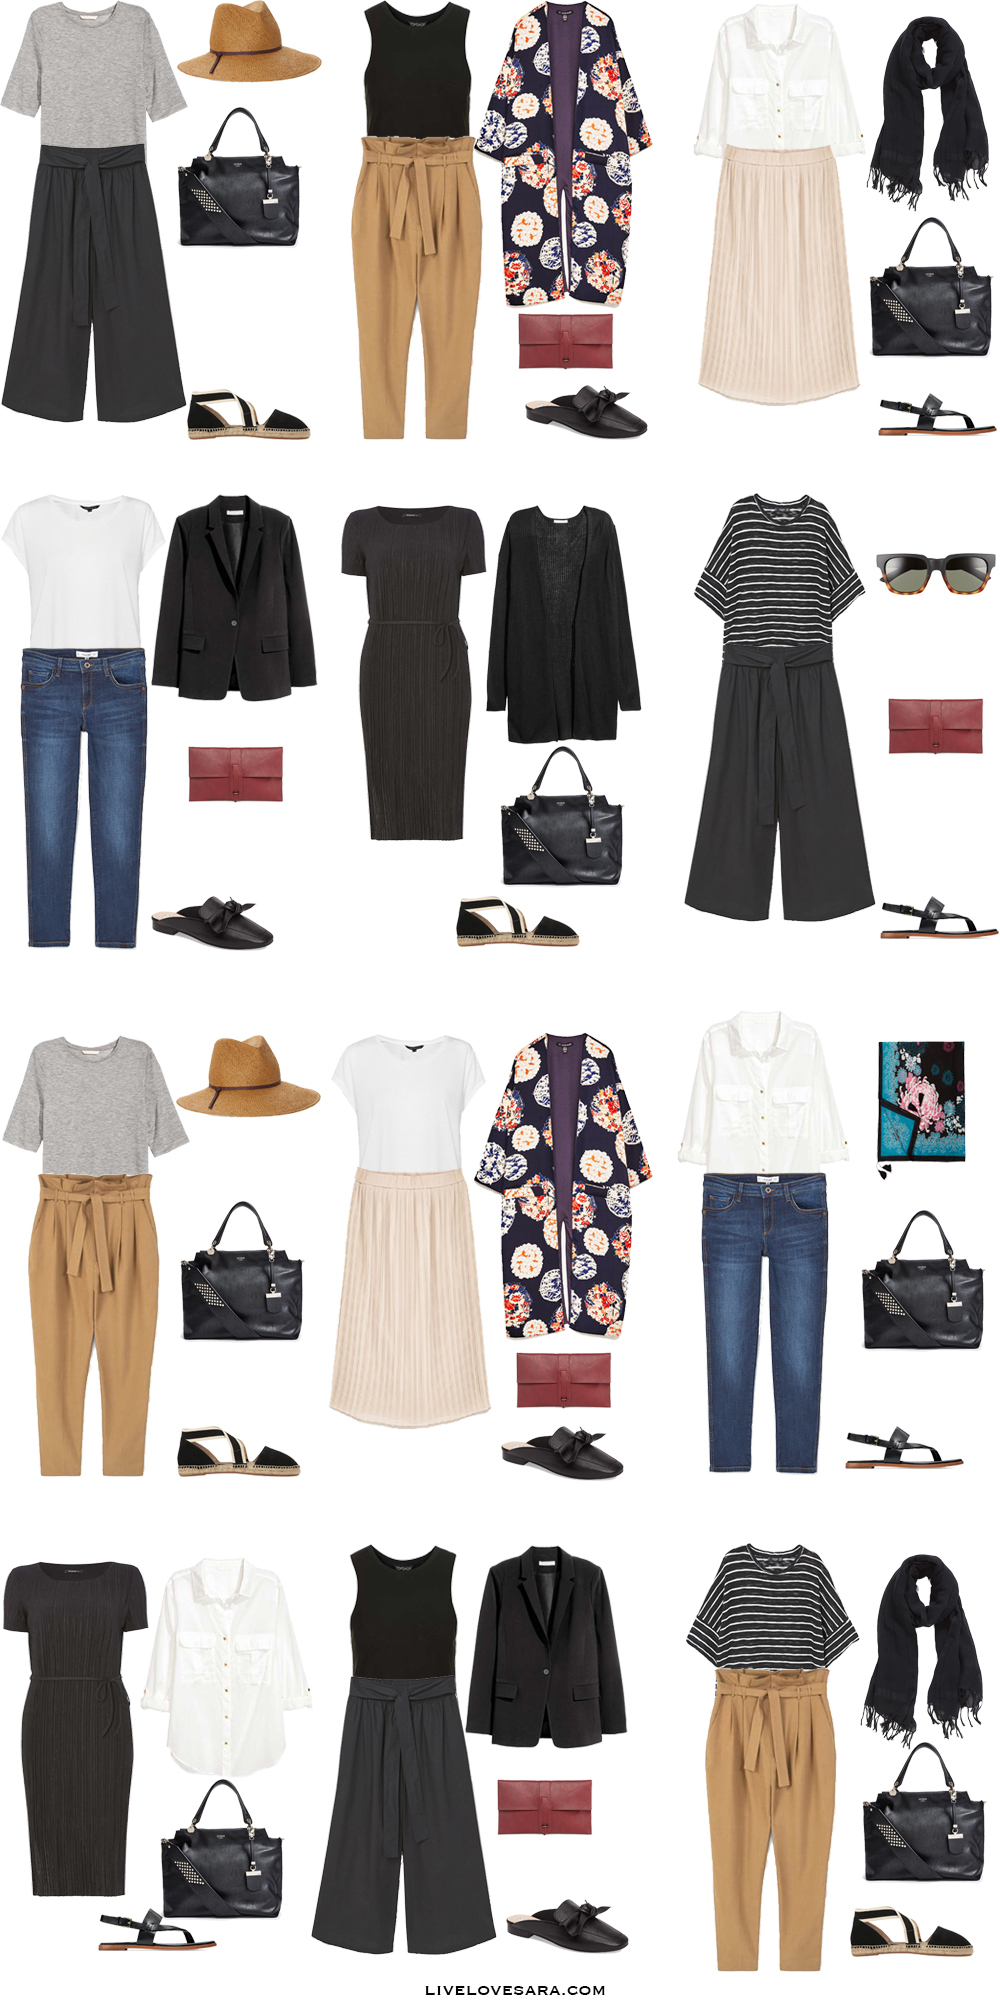 What to Wear in Dubai UAE Outfit Options 1-12 Packing Light List #packinglist #packinglight #travellight #travel #livelovesara